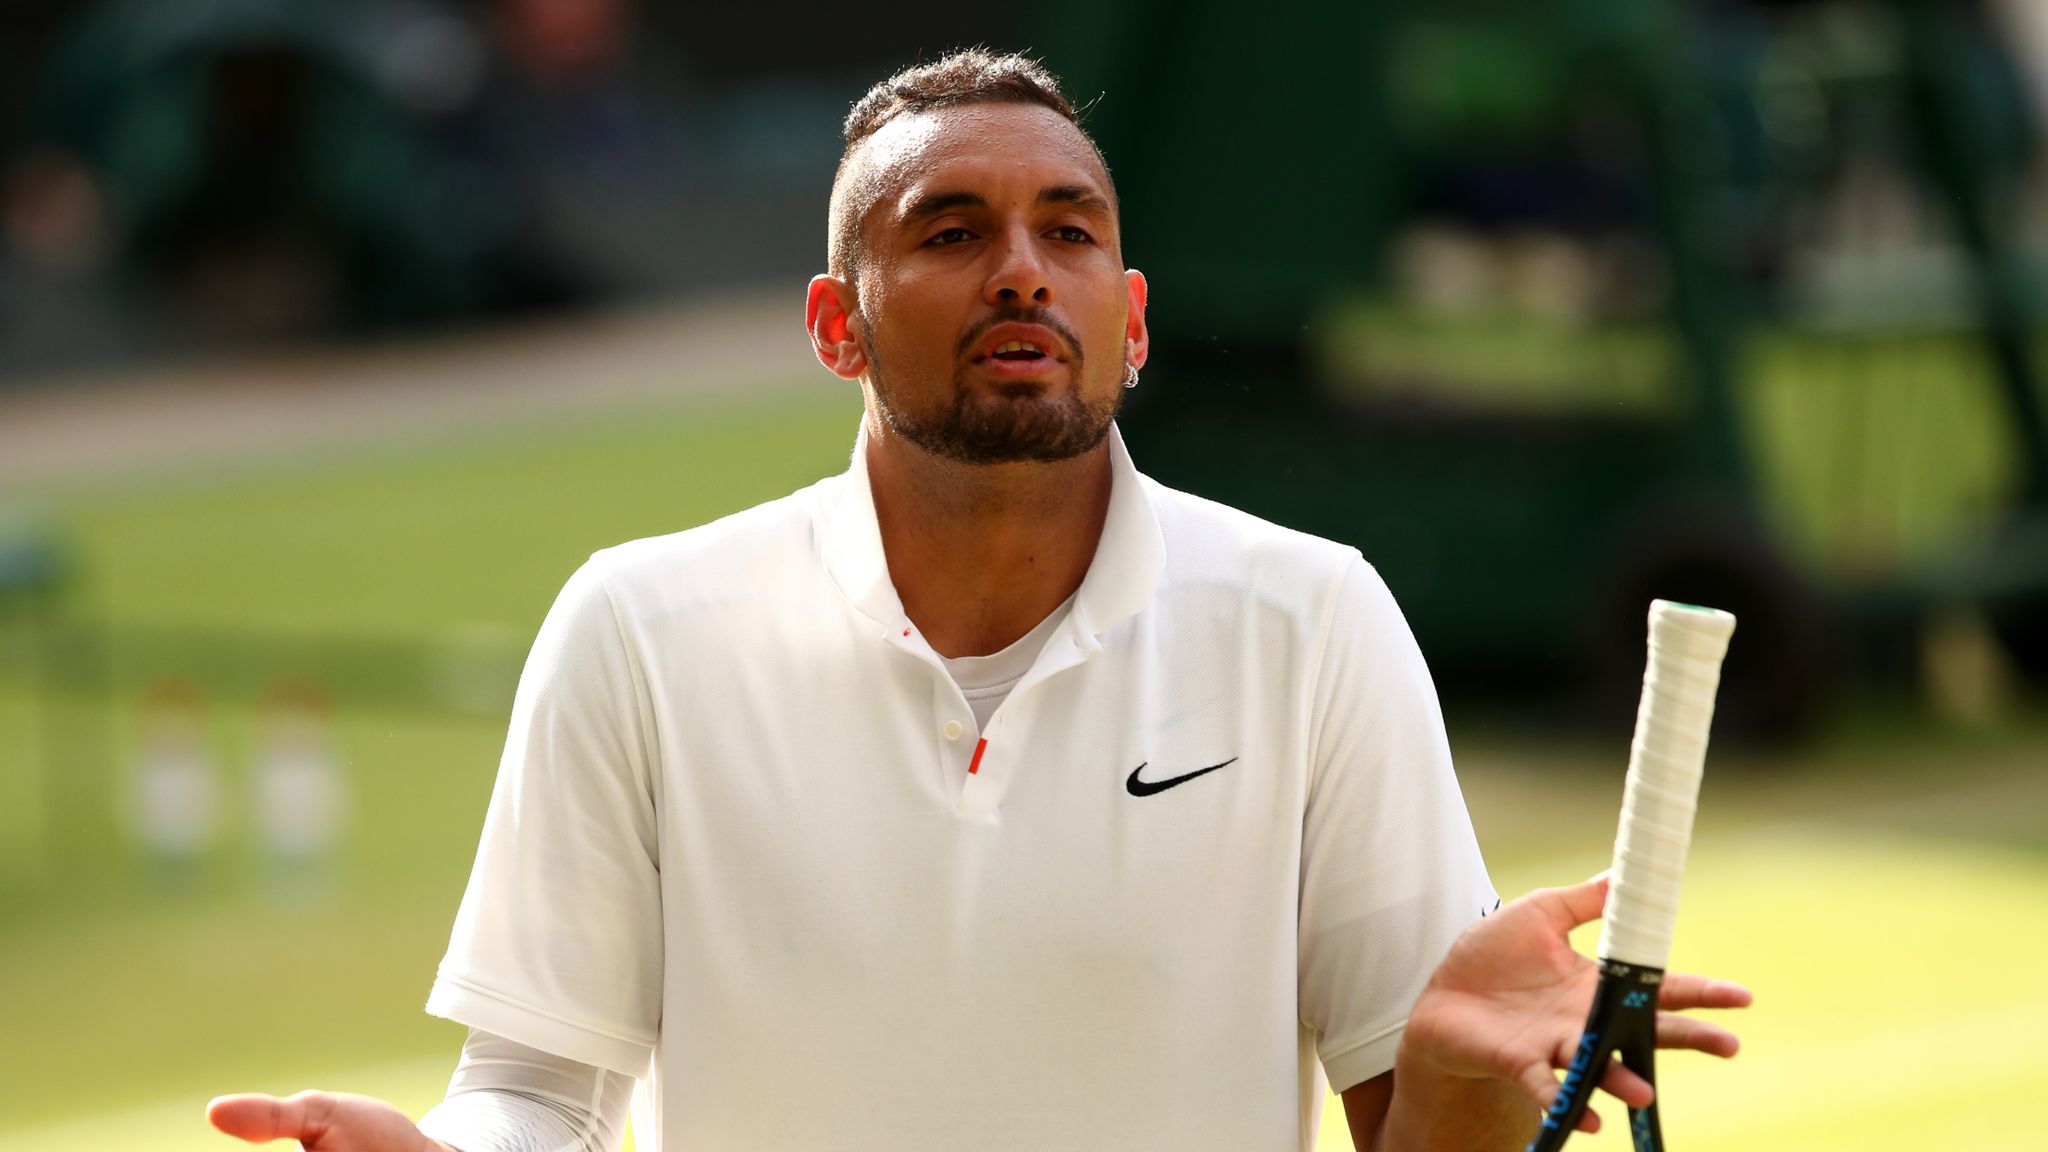 Nick Kyrgios admits trying to hit Rafael Nadal with ball during Wimbledon clash Tennis News Sky Sports